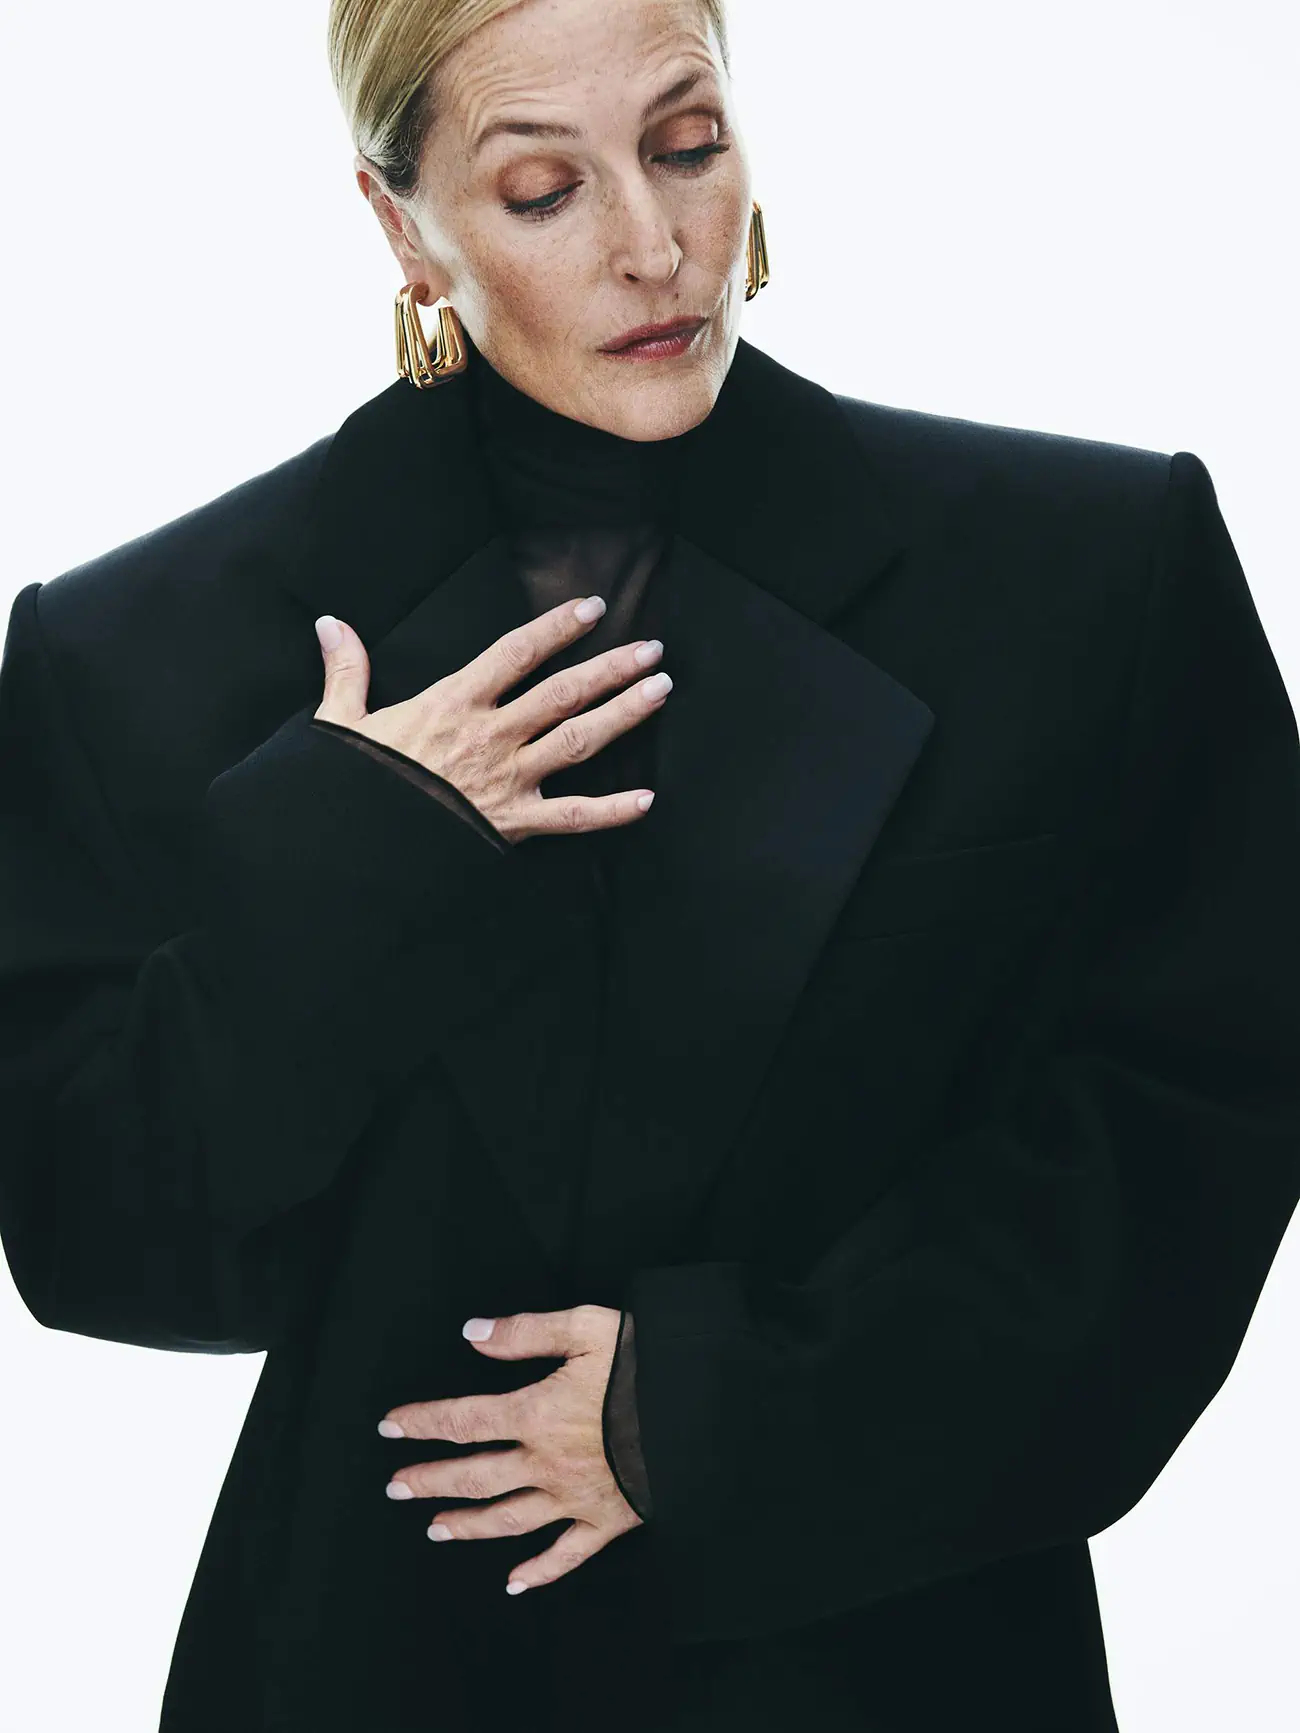 Gillian Anderson covers Porter Magazine October 16th, 2023 by Philip Messmann